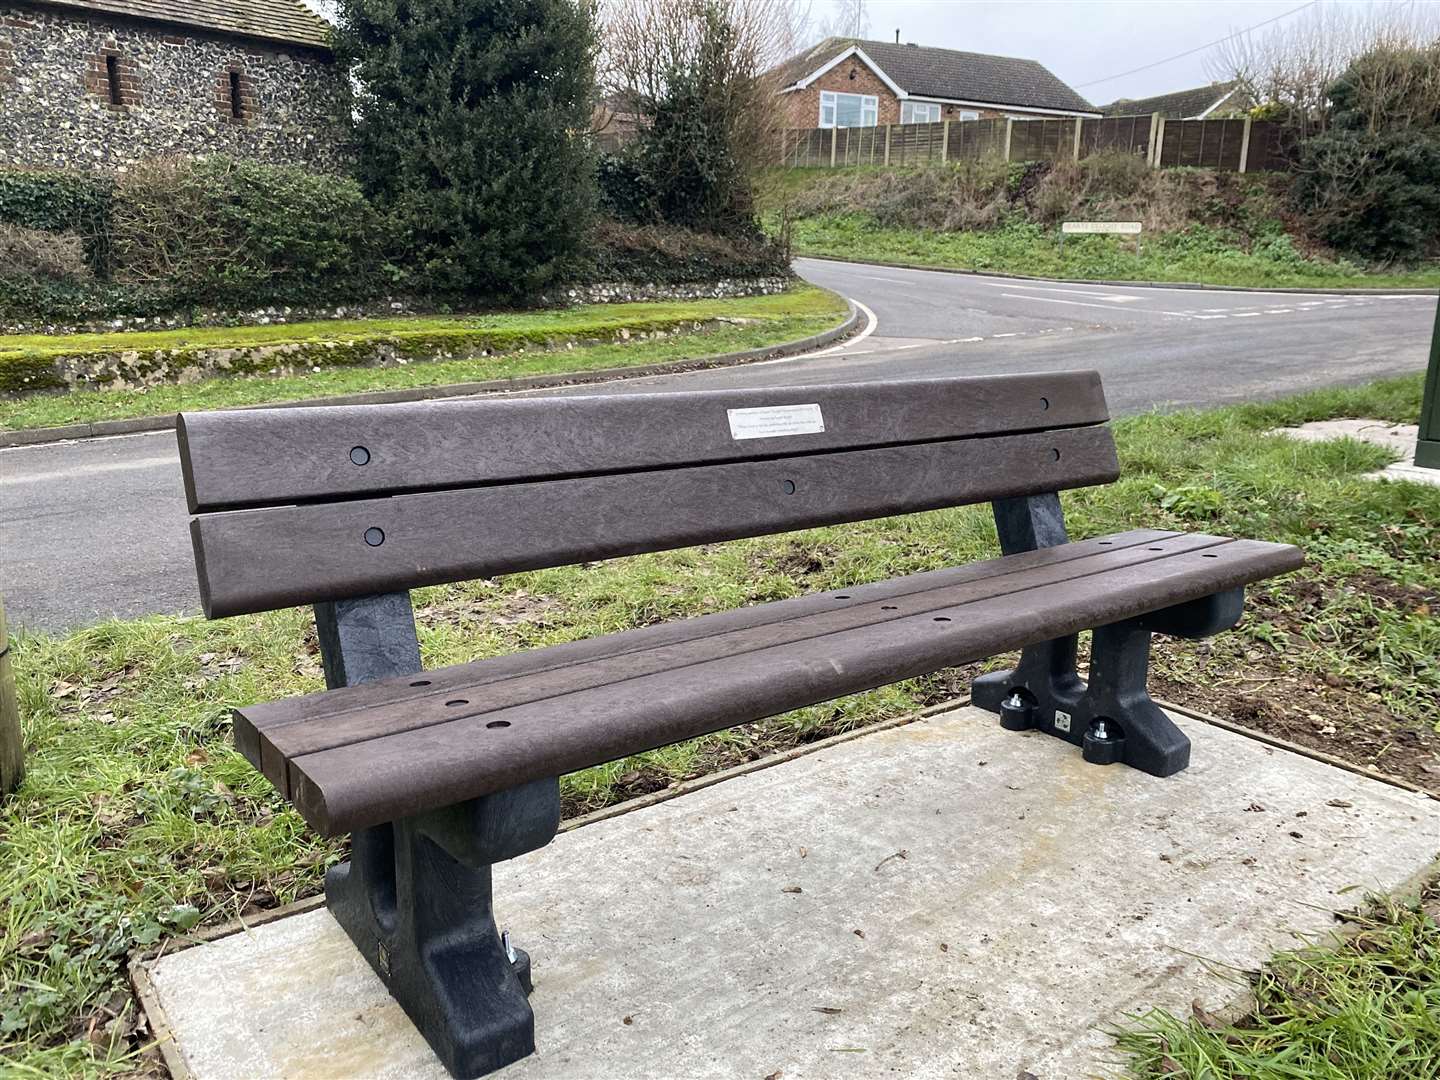 The Stuart Charlesworth memorial bench in Hearts Delight Road, Tunstall